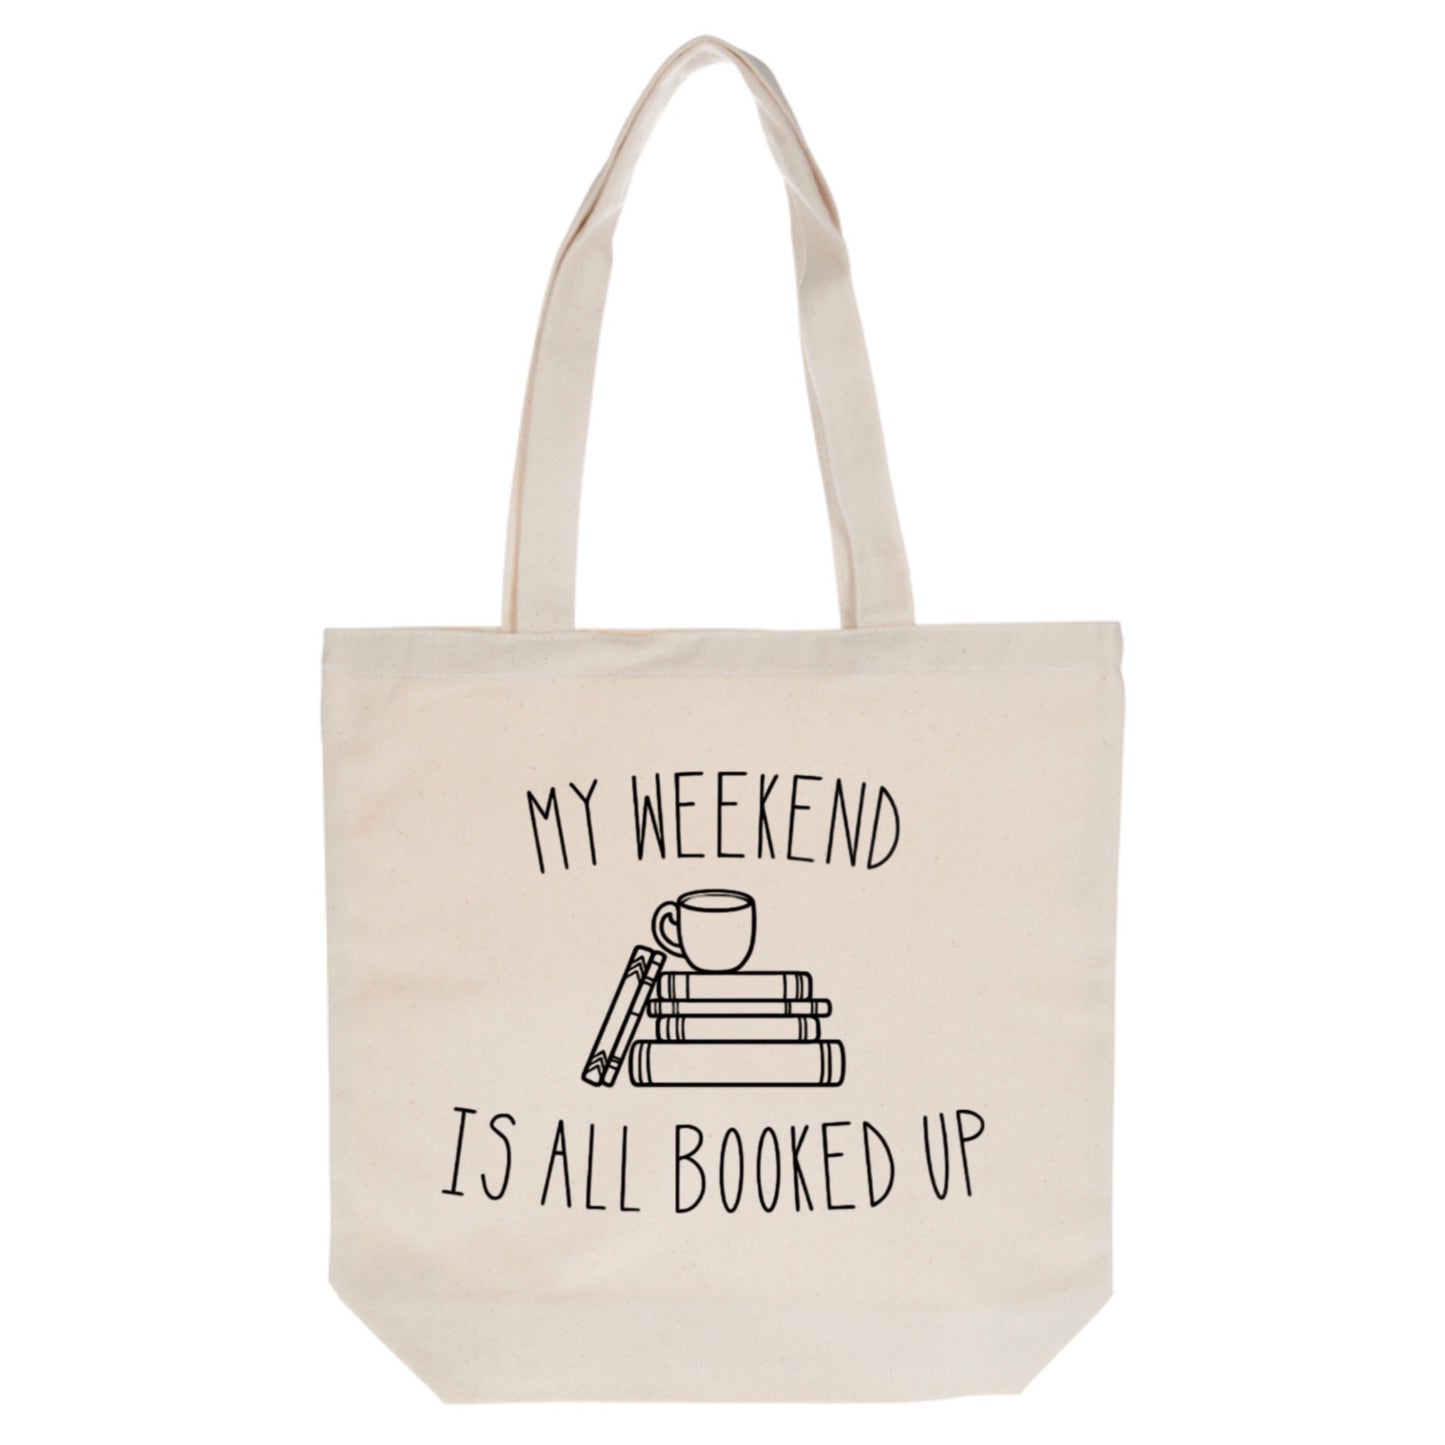 All Booked Up Tote